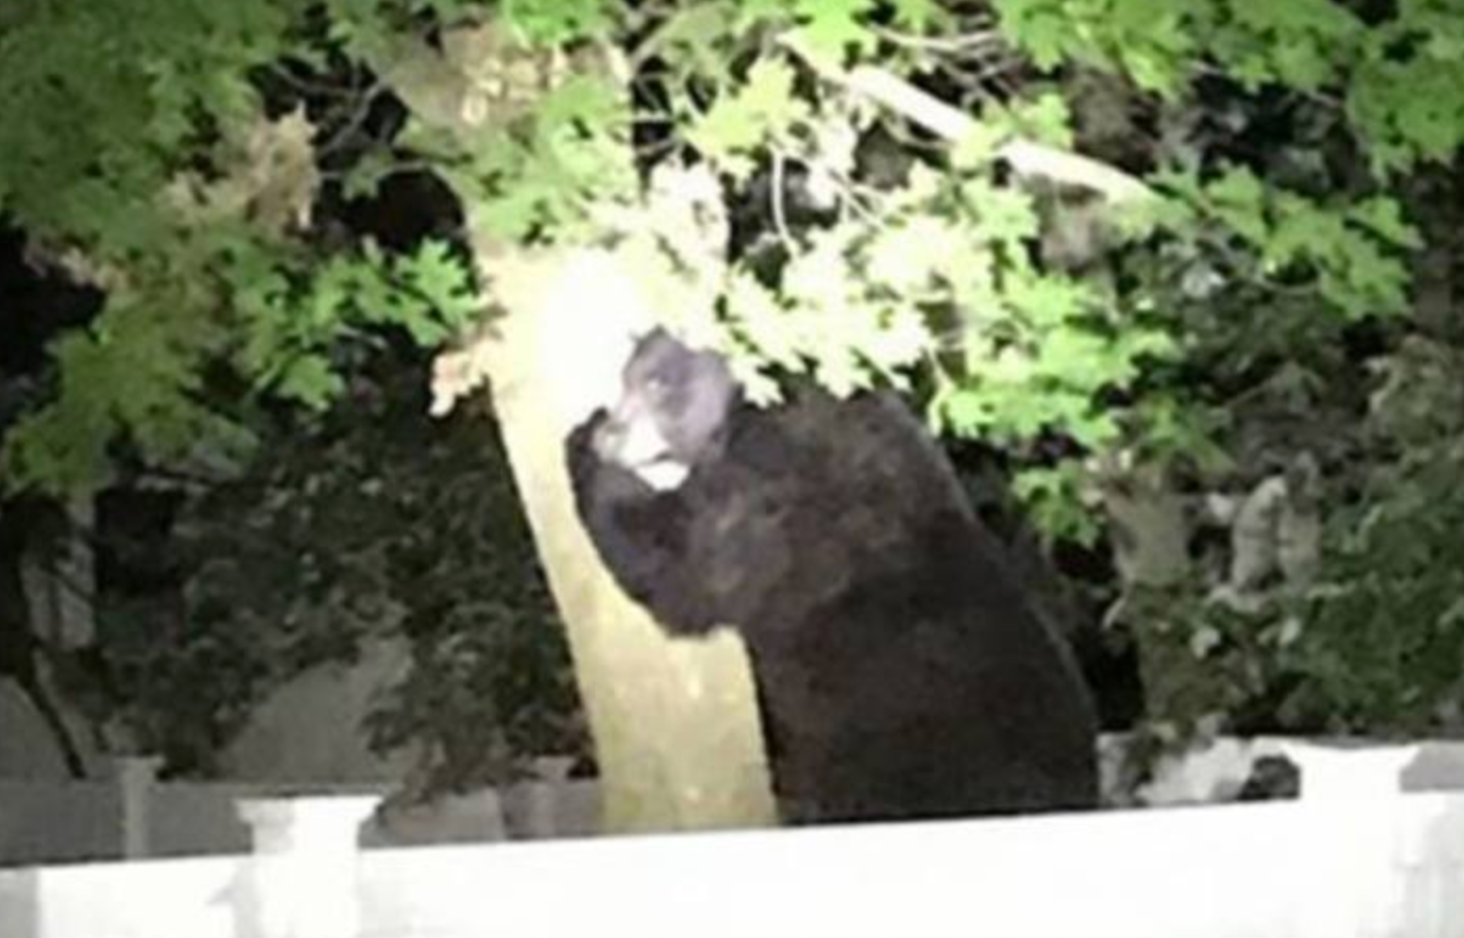  A black bear on a tree in a residential portion of Ocean County's Manchester Township on Sunday. (Image courtesy of the Manchester Township Police Department) 